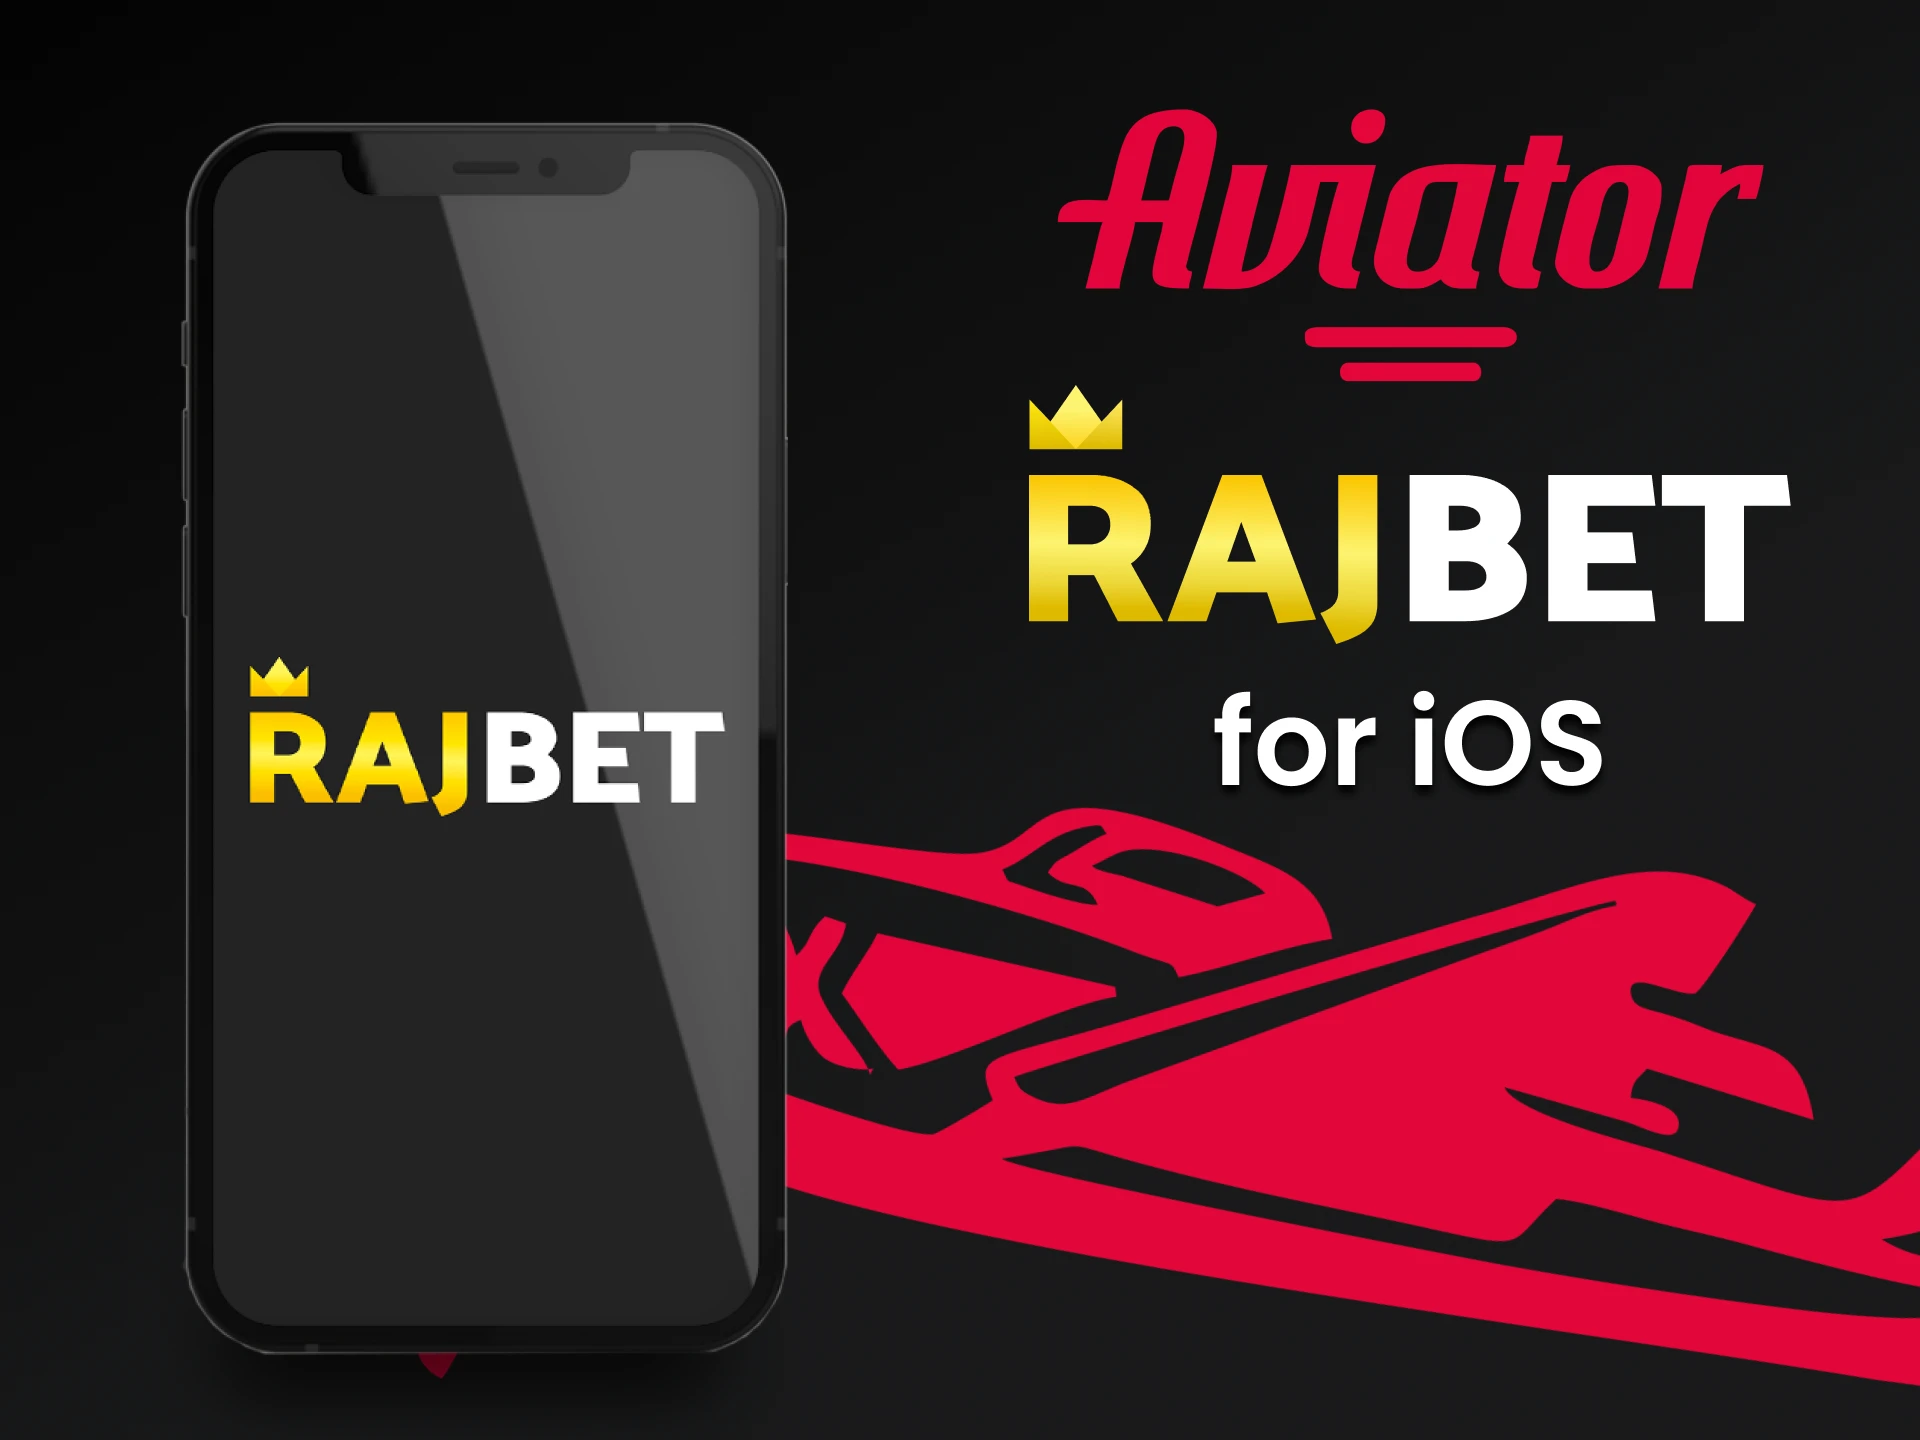 Use Rajbet Android app to play Aviator.